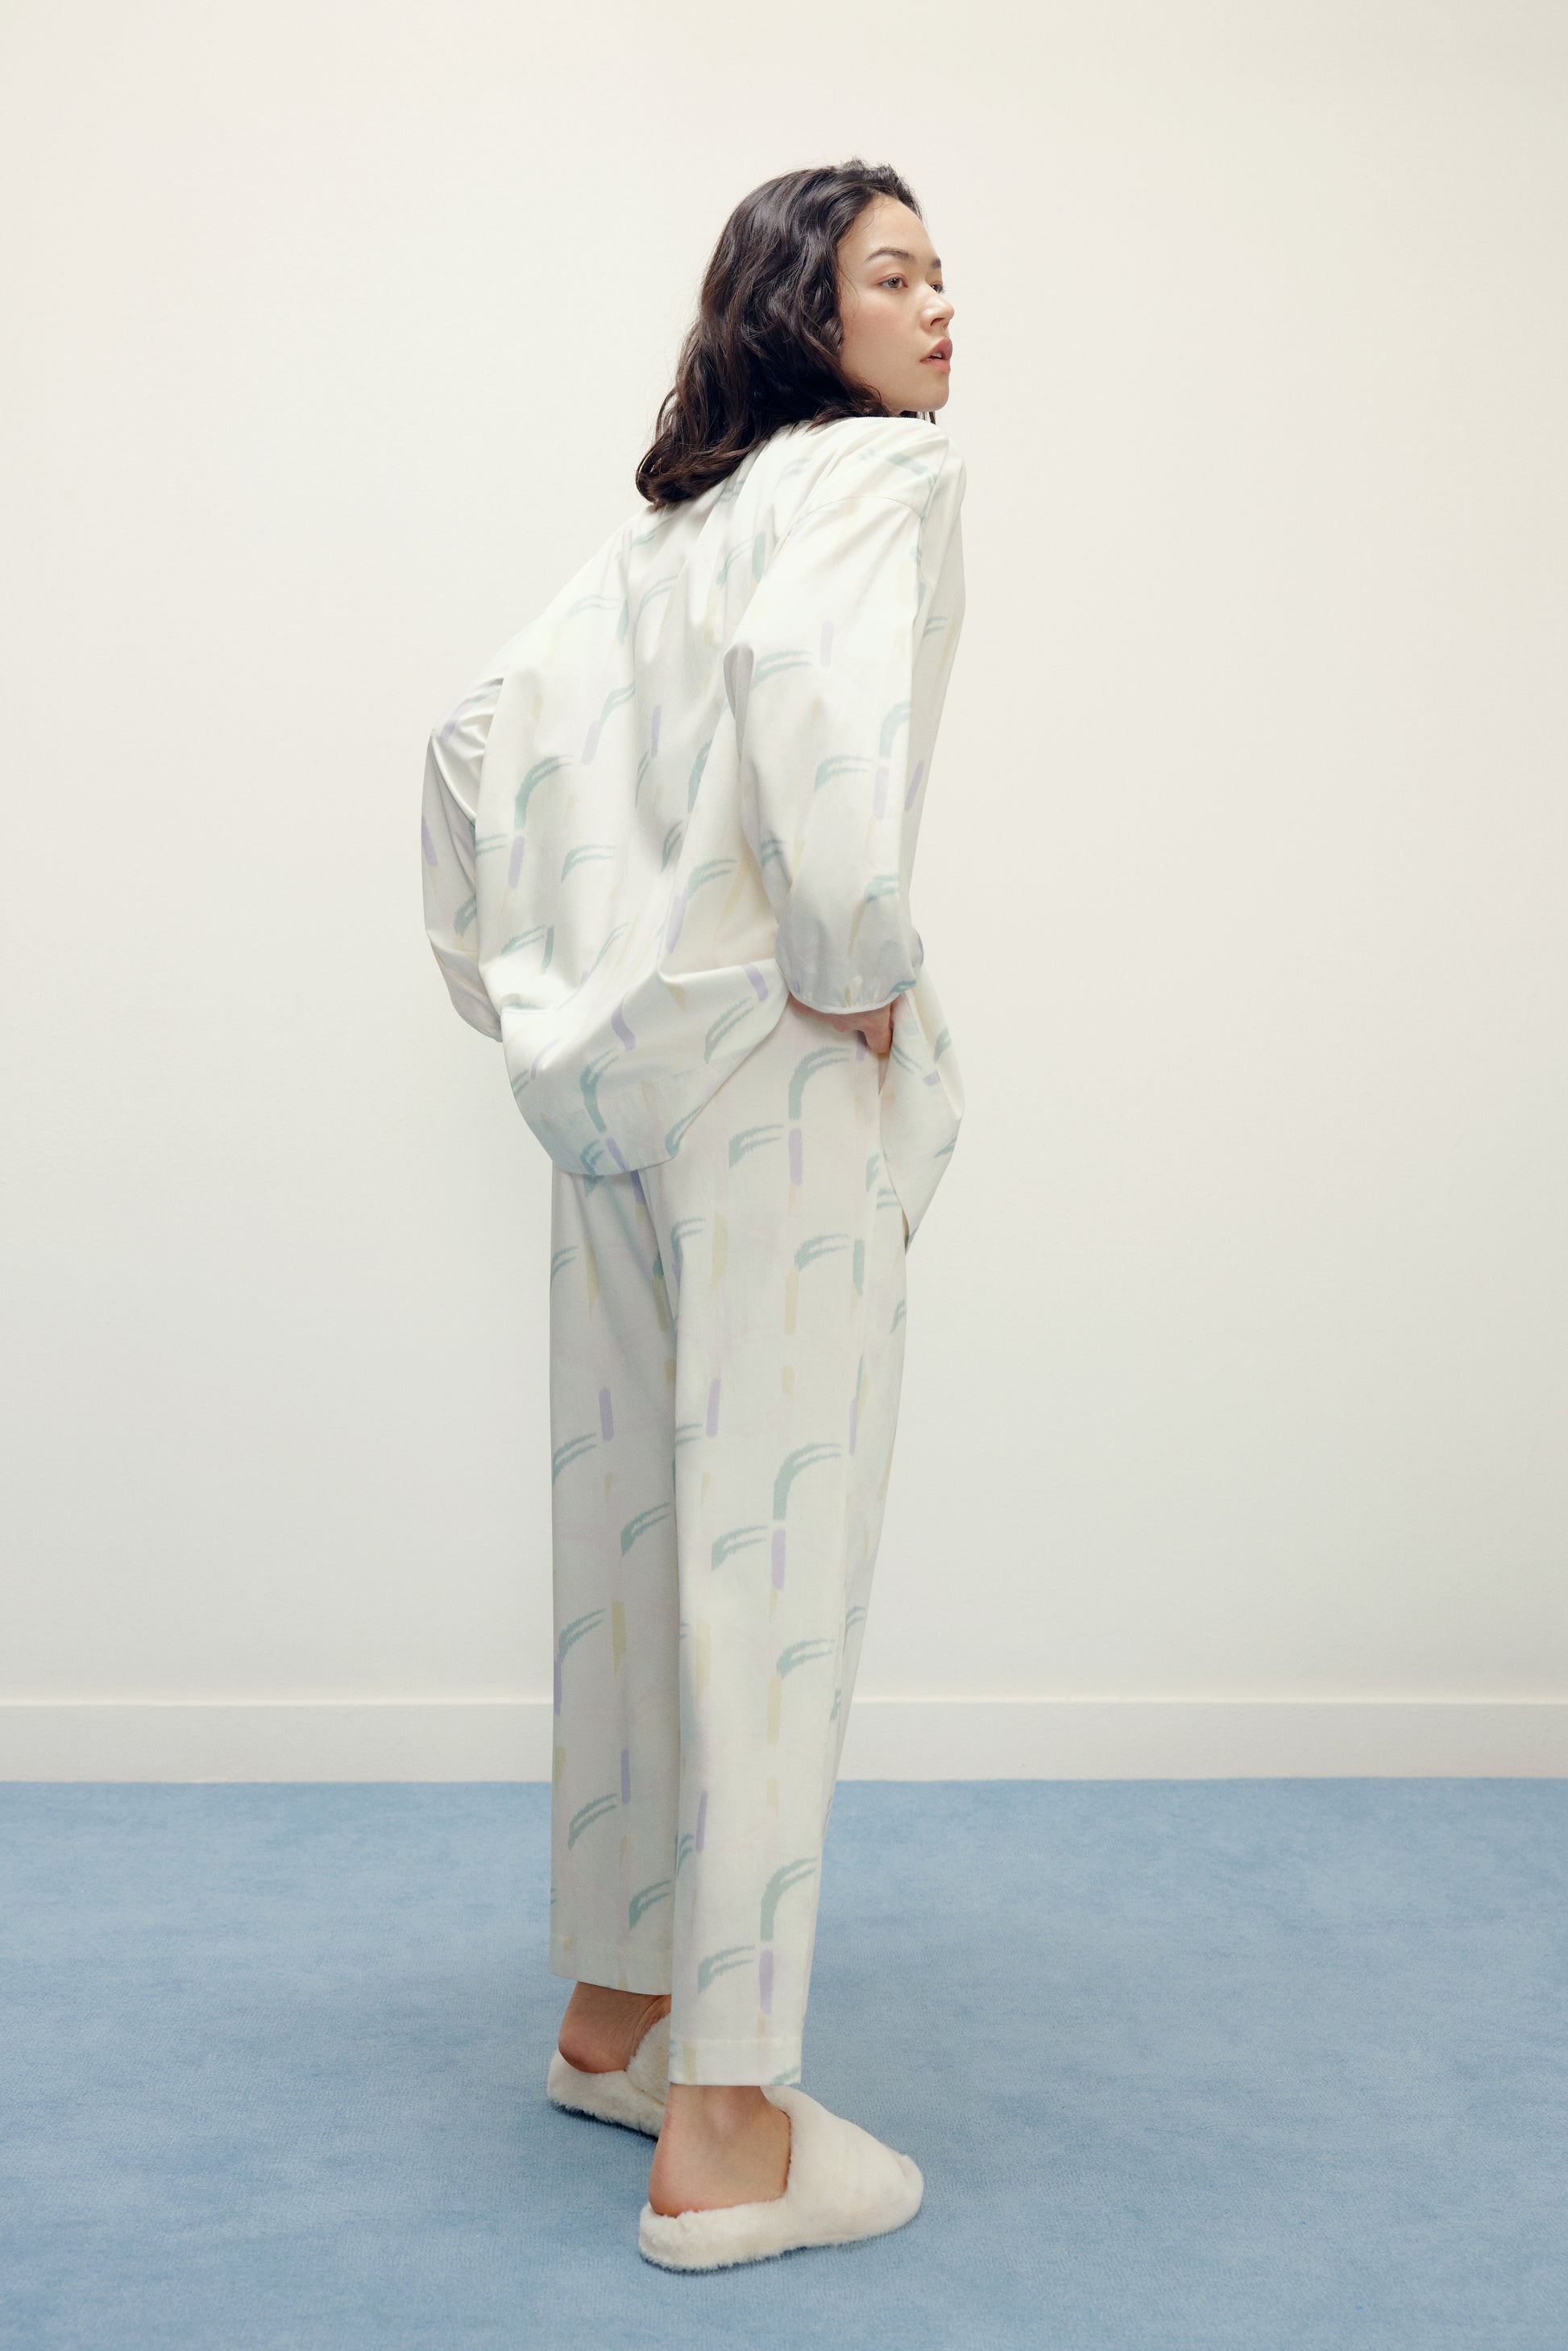 back of a woman wearing a white pajama sets with pattern and white slippers